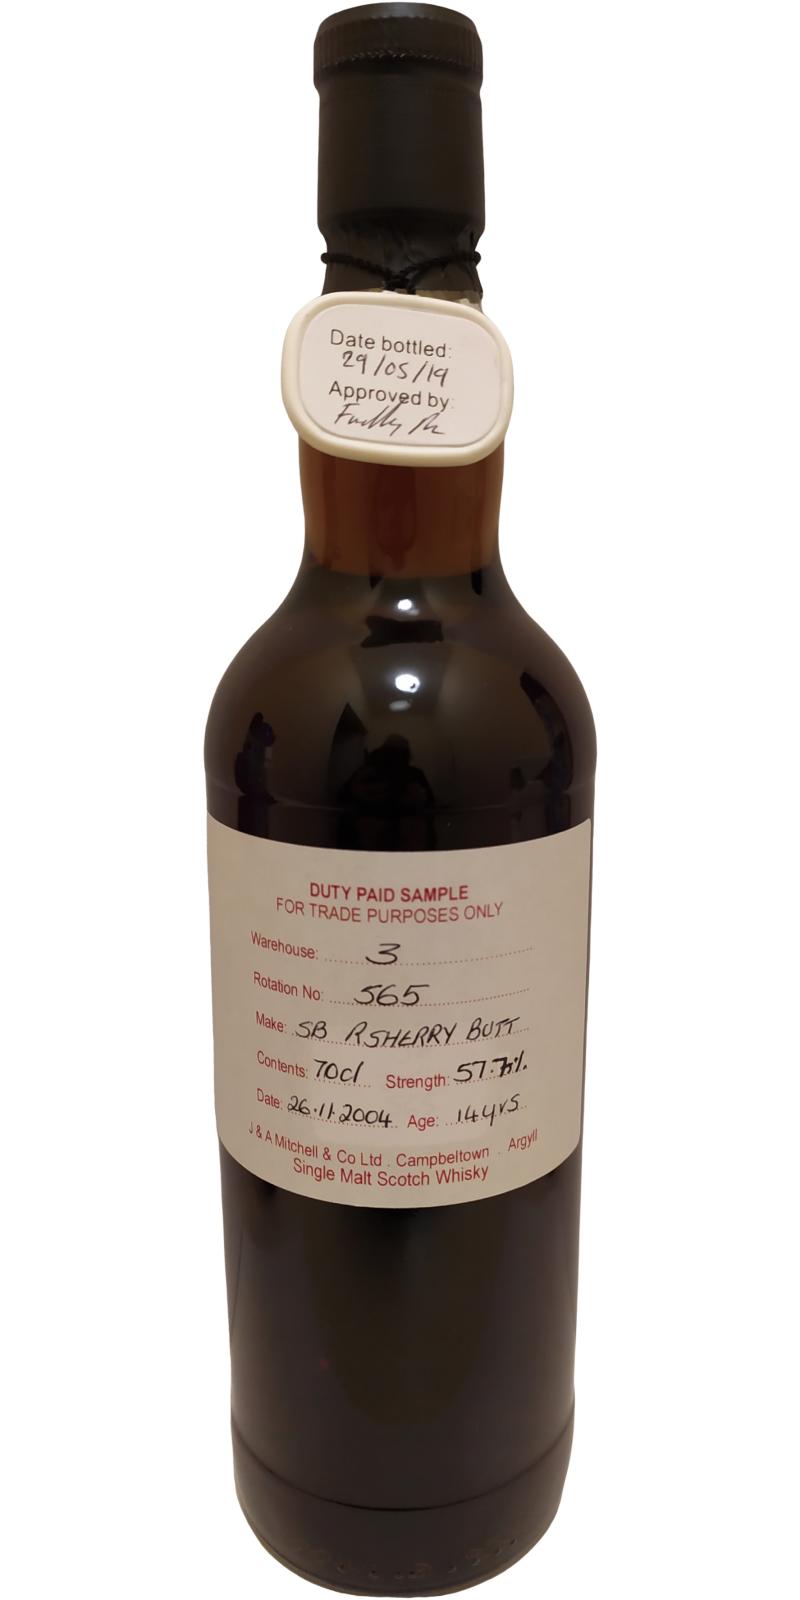 Springbank 2004 Duty Paid Sample For Trade Purposes Only Refill Sherry Butt Rotation 565 57.7% 700ml